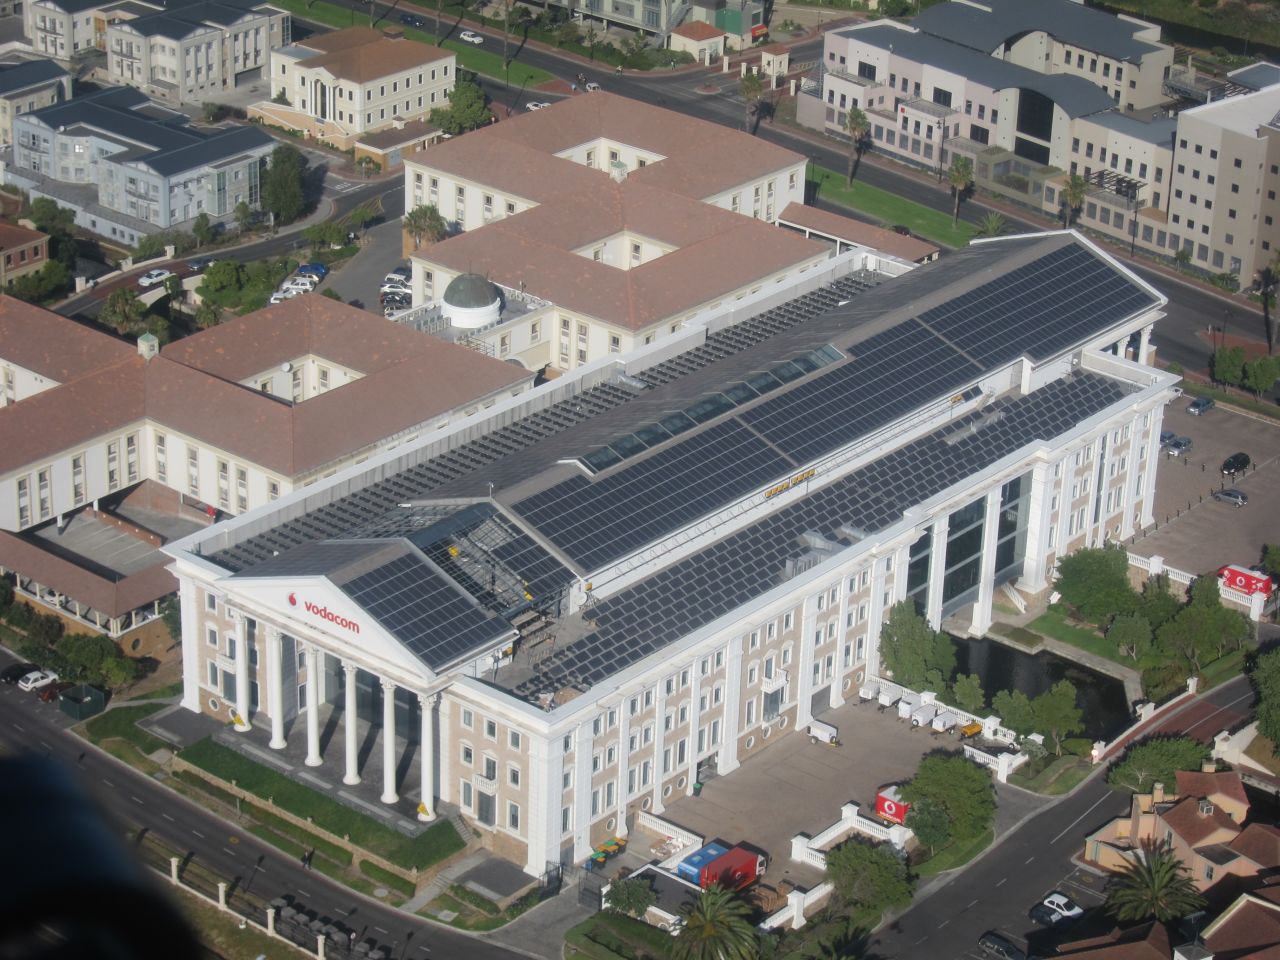 Vodacom Century City building was recently honored as the winner in the category for African Solar Project of the Year by Africa Energy.